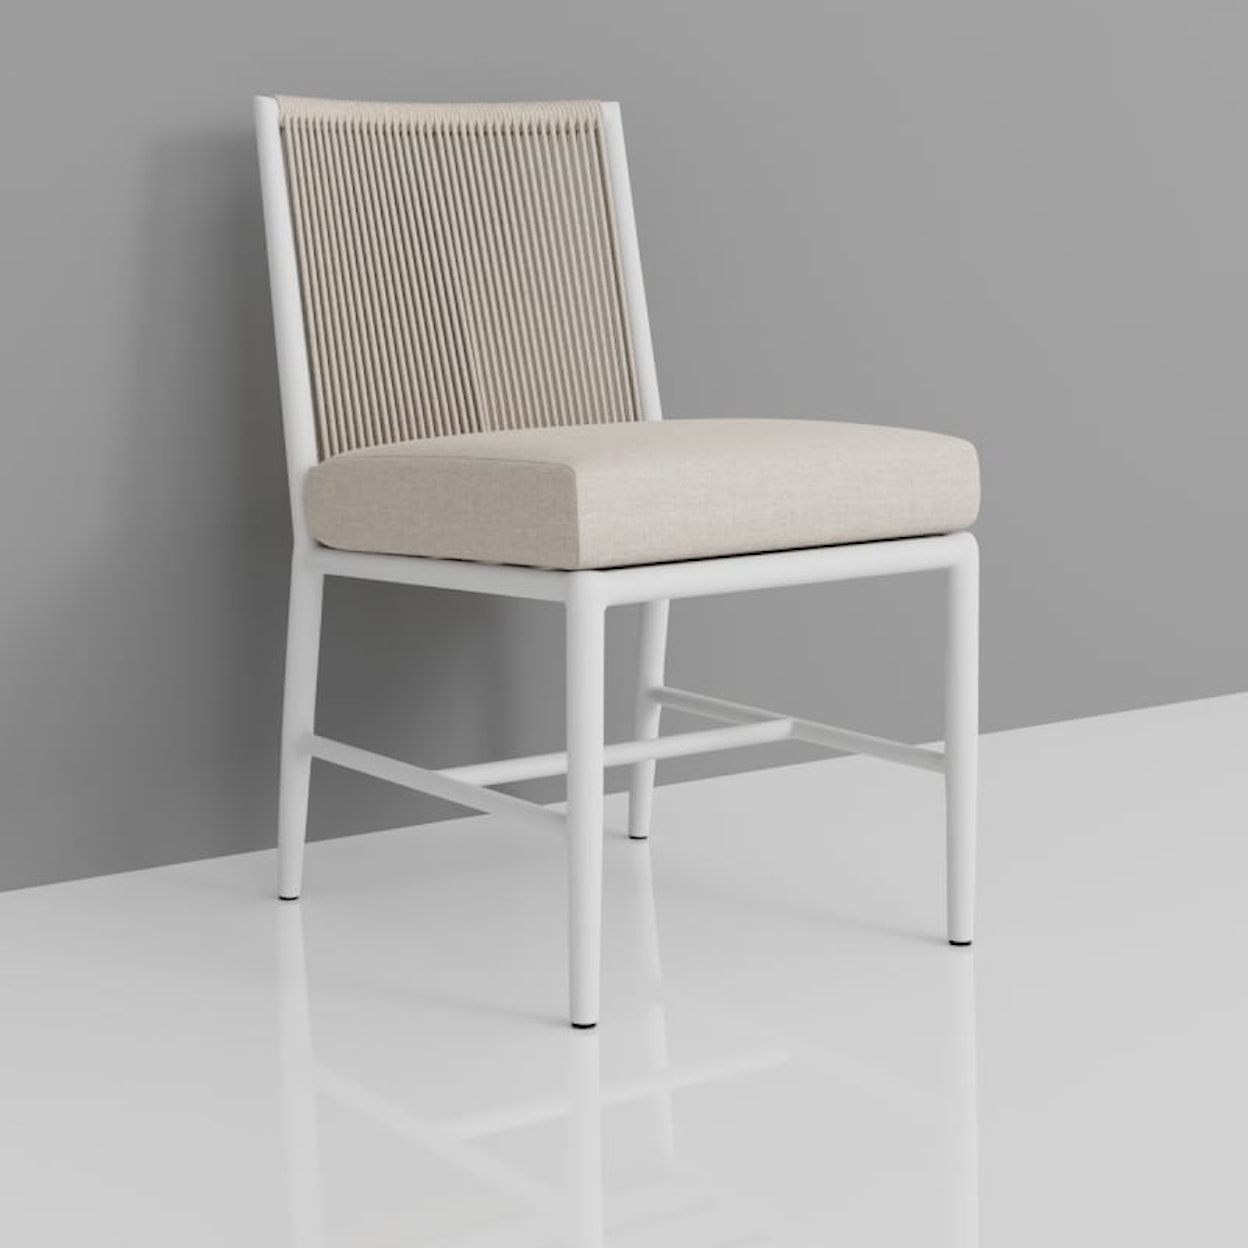 Sunset West Sabbia Outdoor Dining Chair